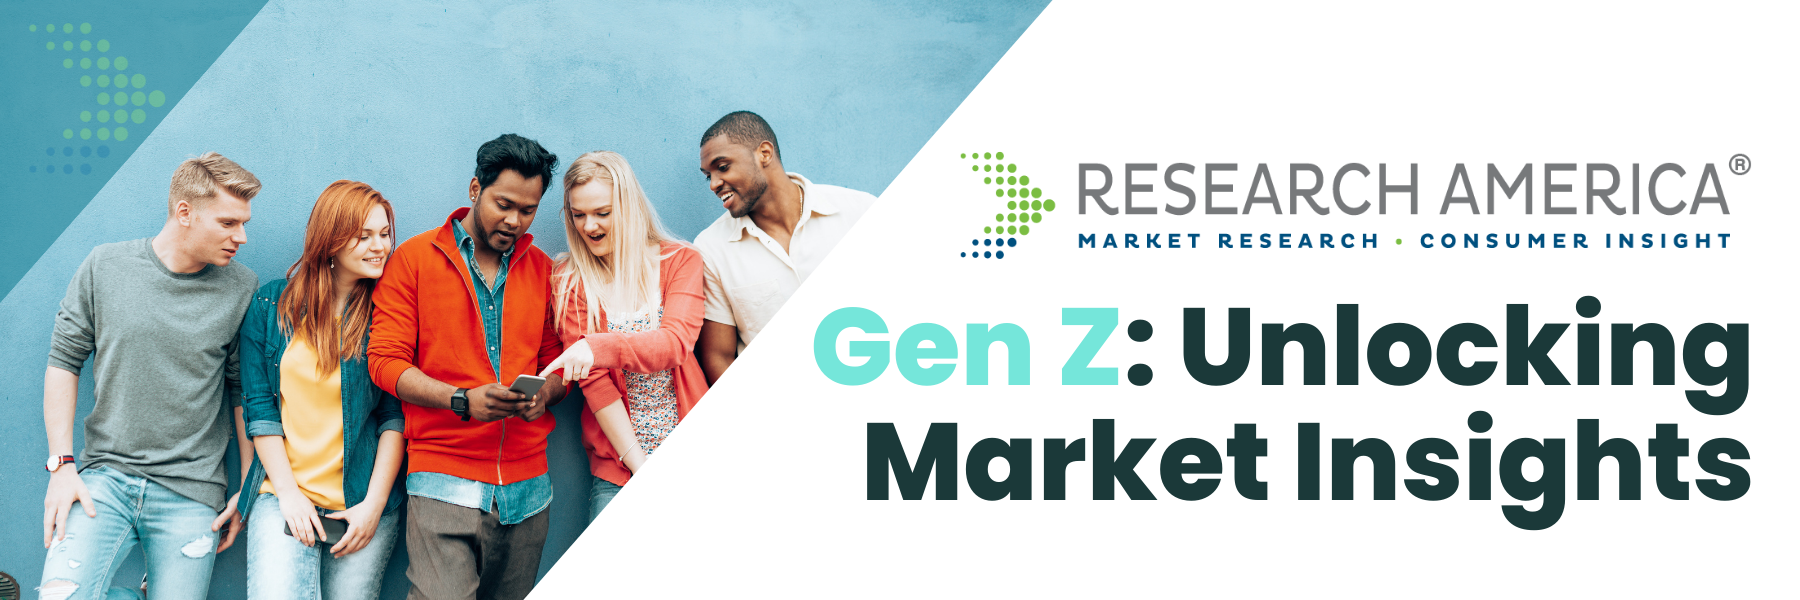 Gen Z: Unlocking Market Insights with Research America Inc.